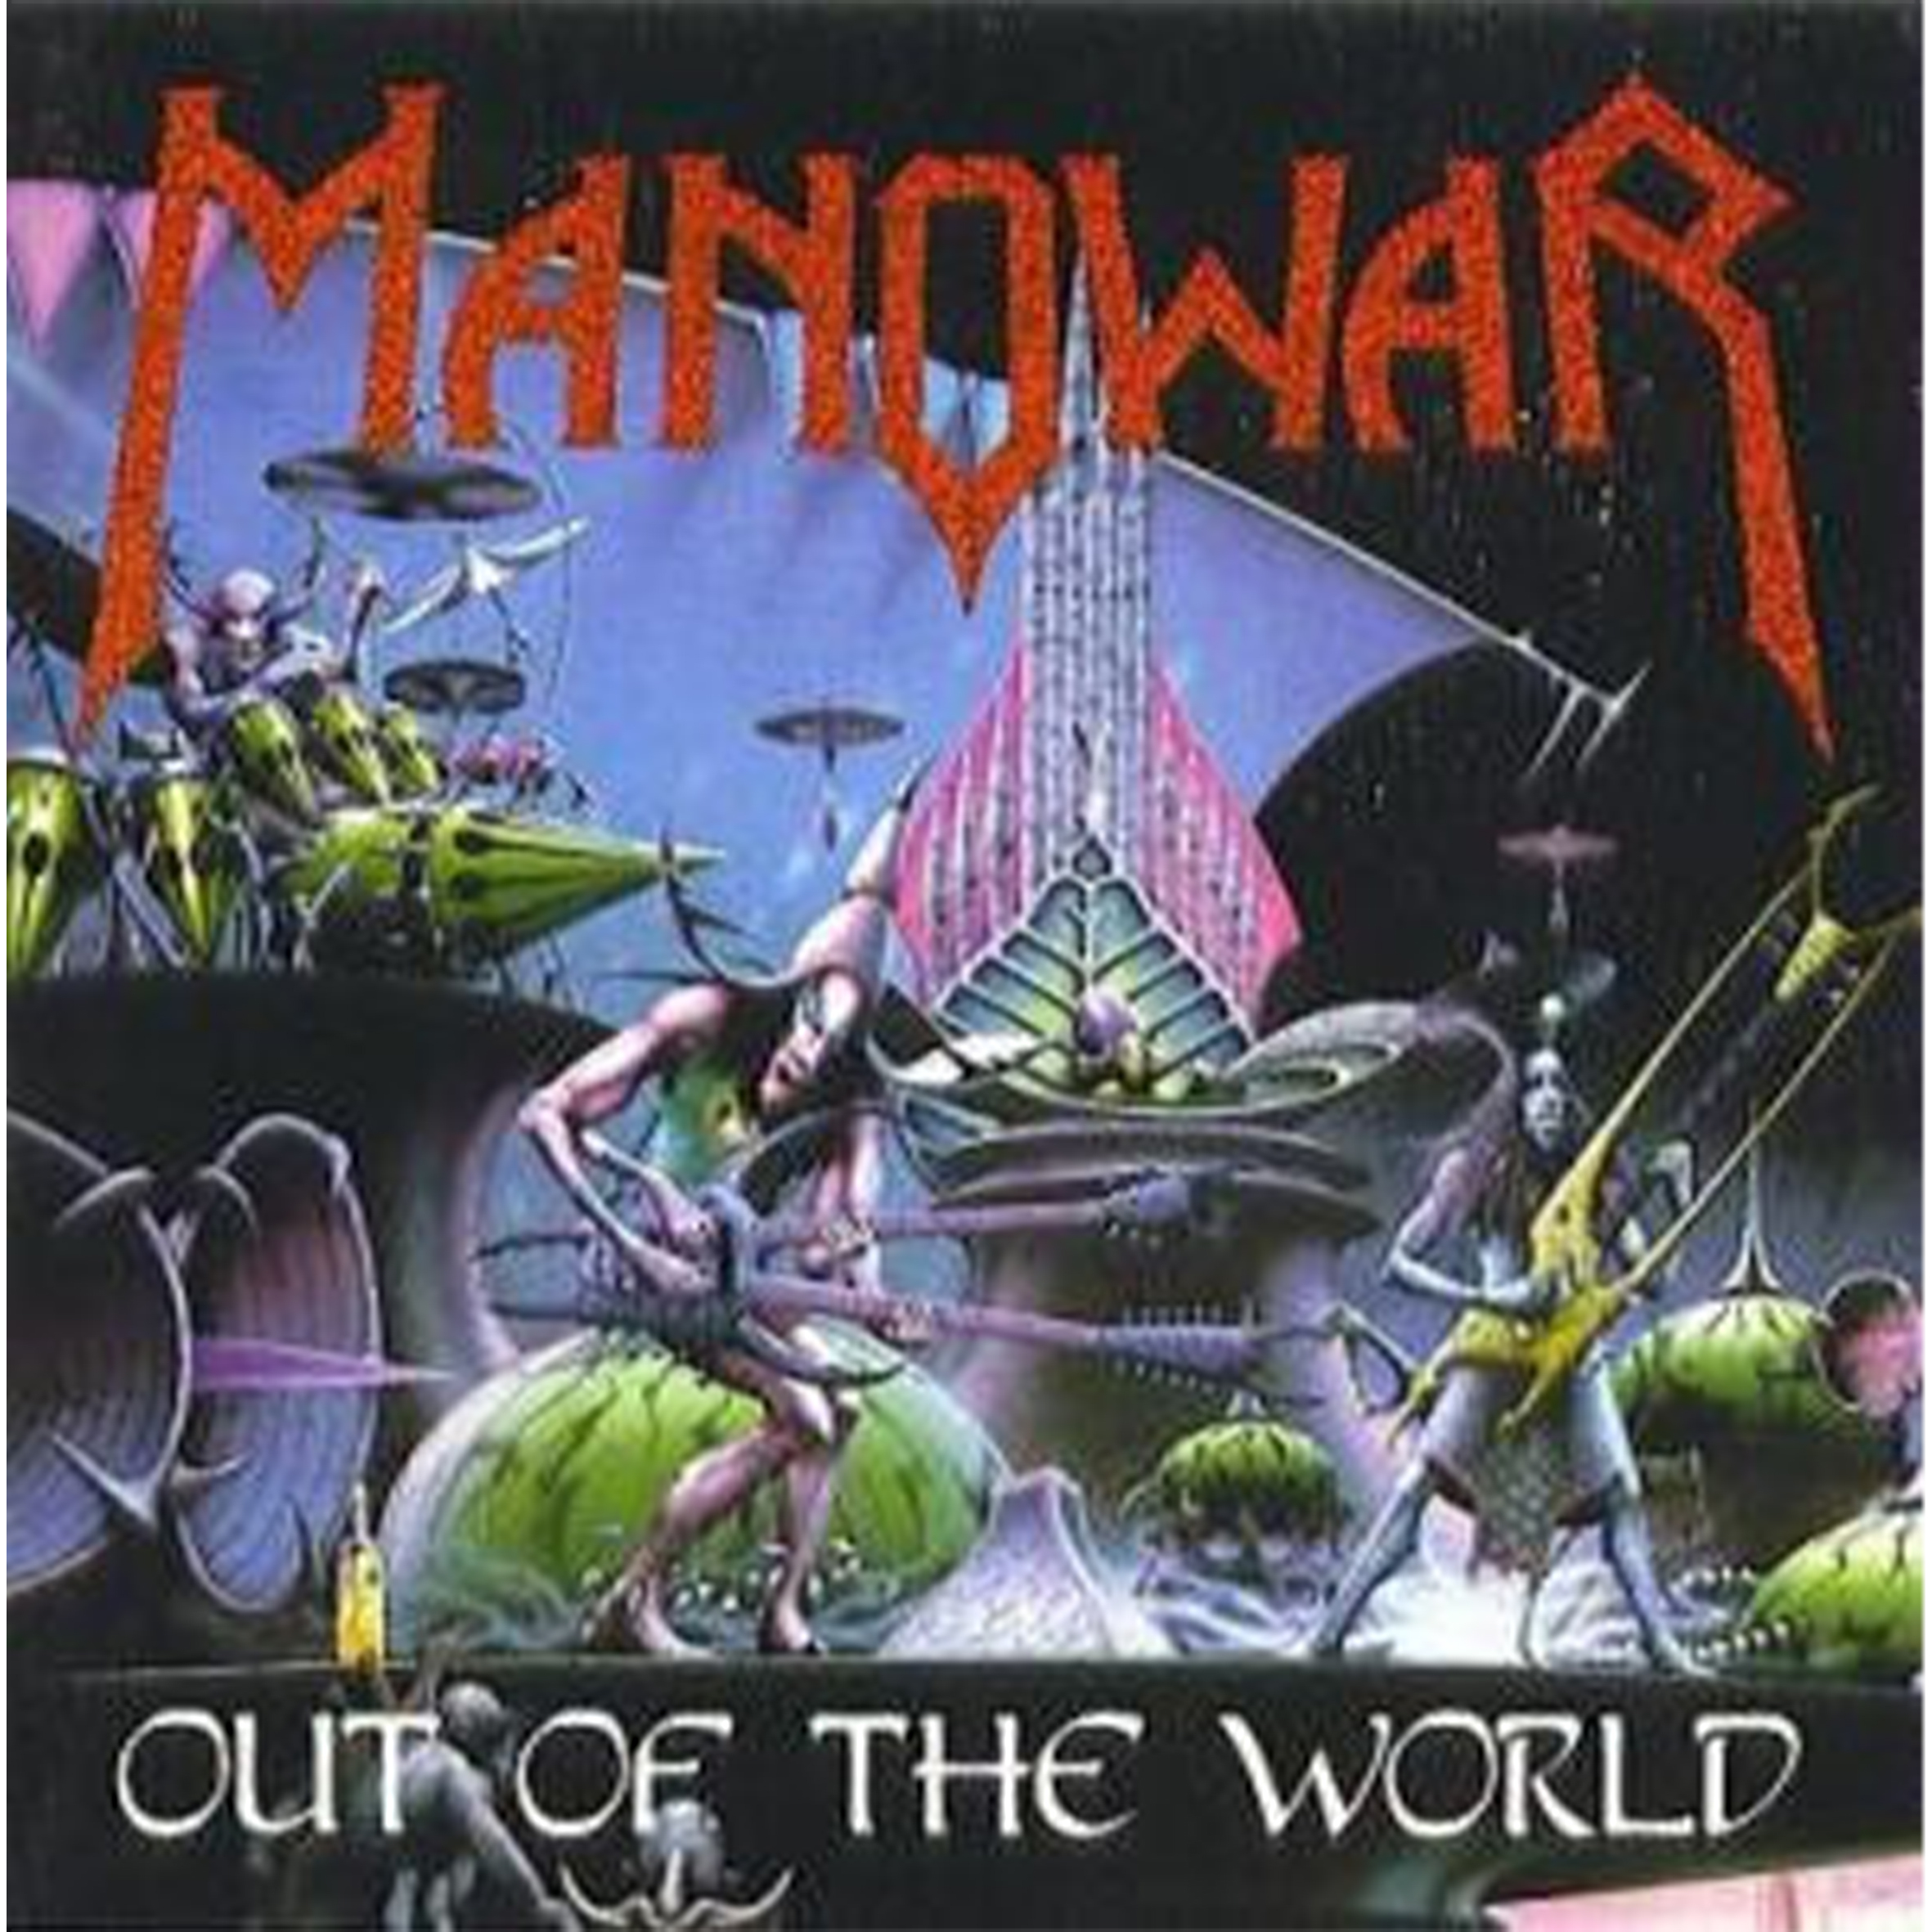 CD - Manowar - Out Of The World (Italy)